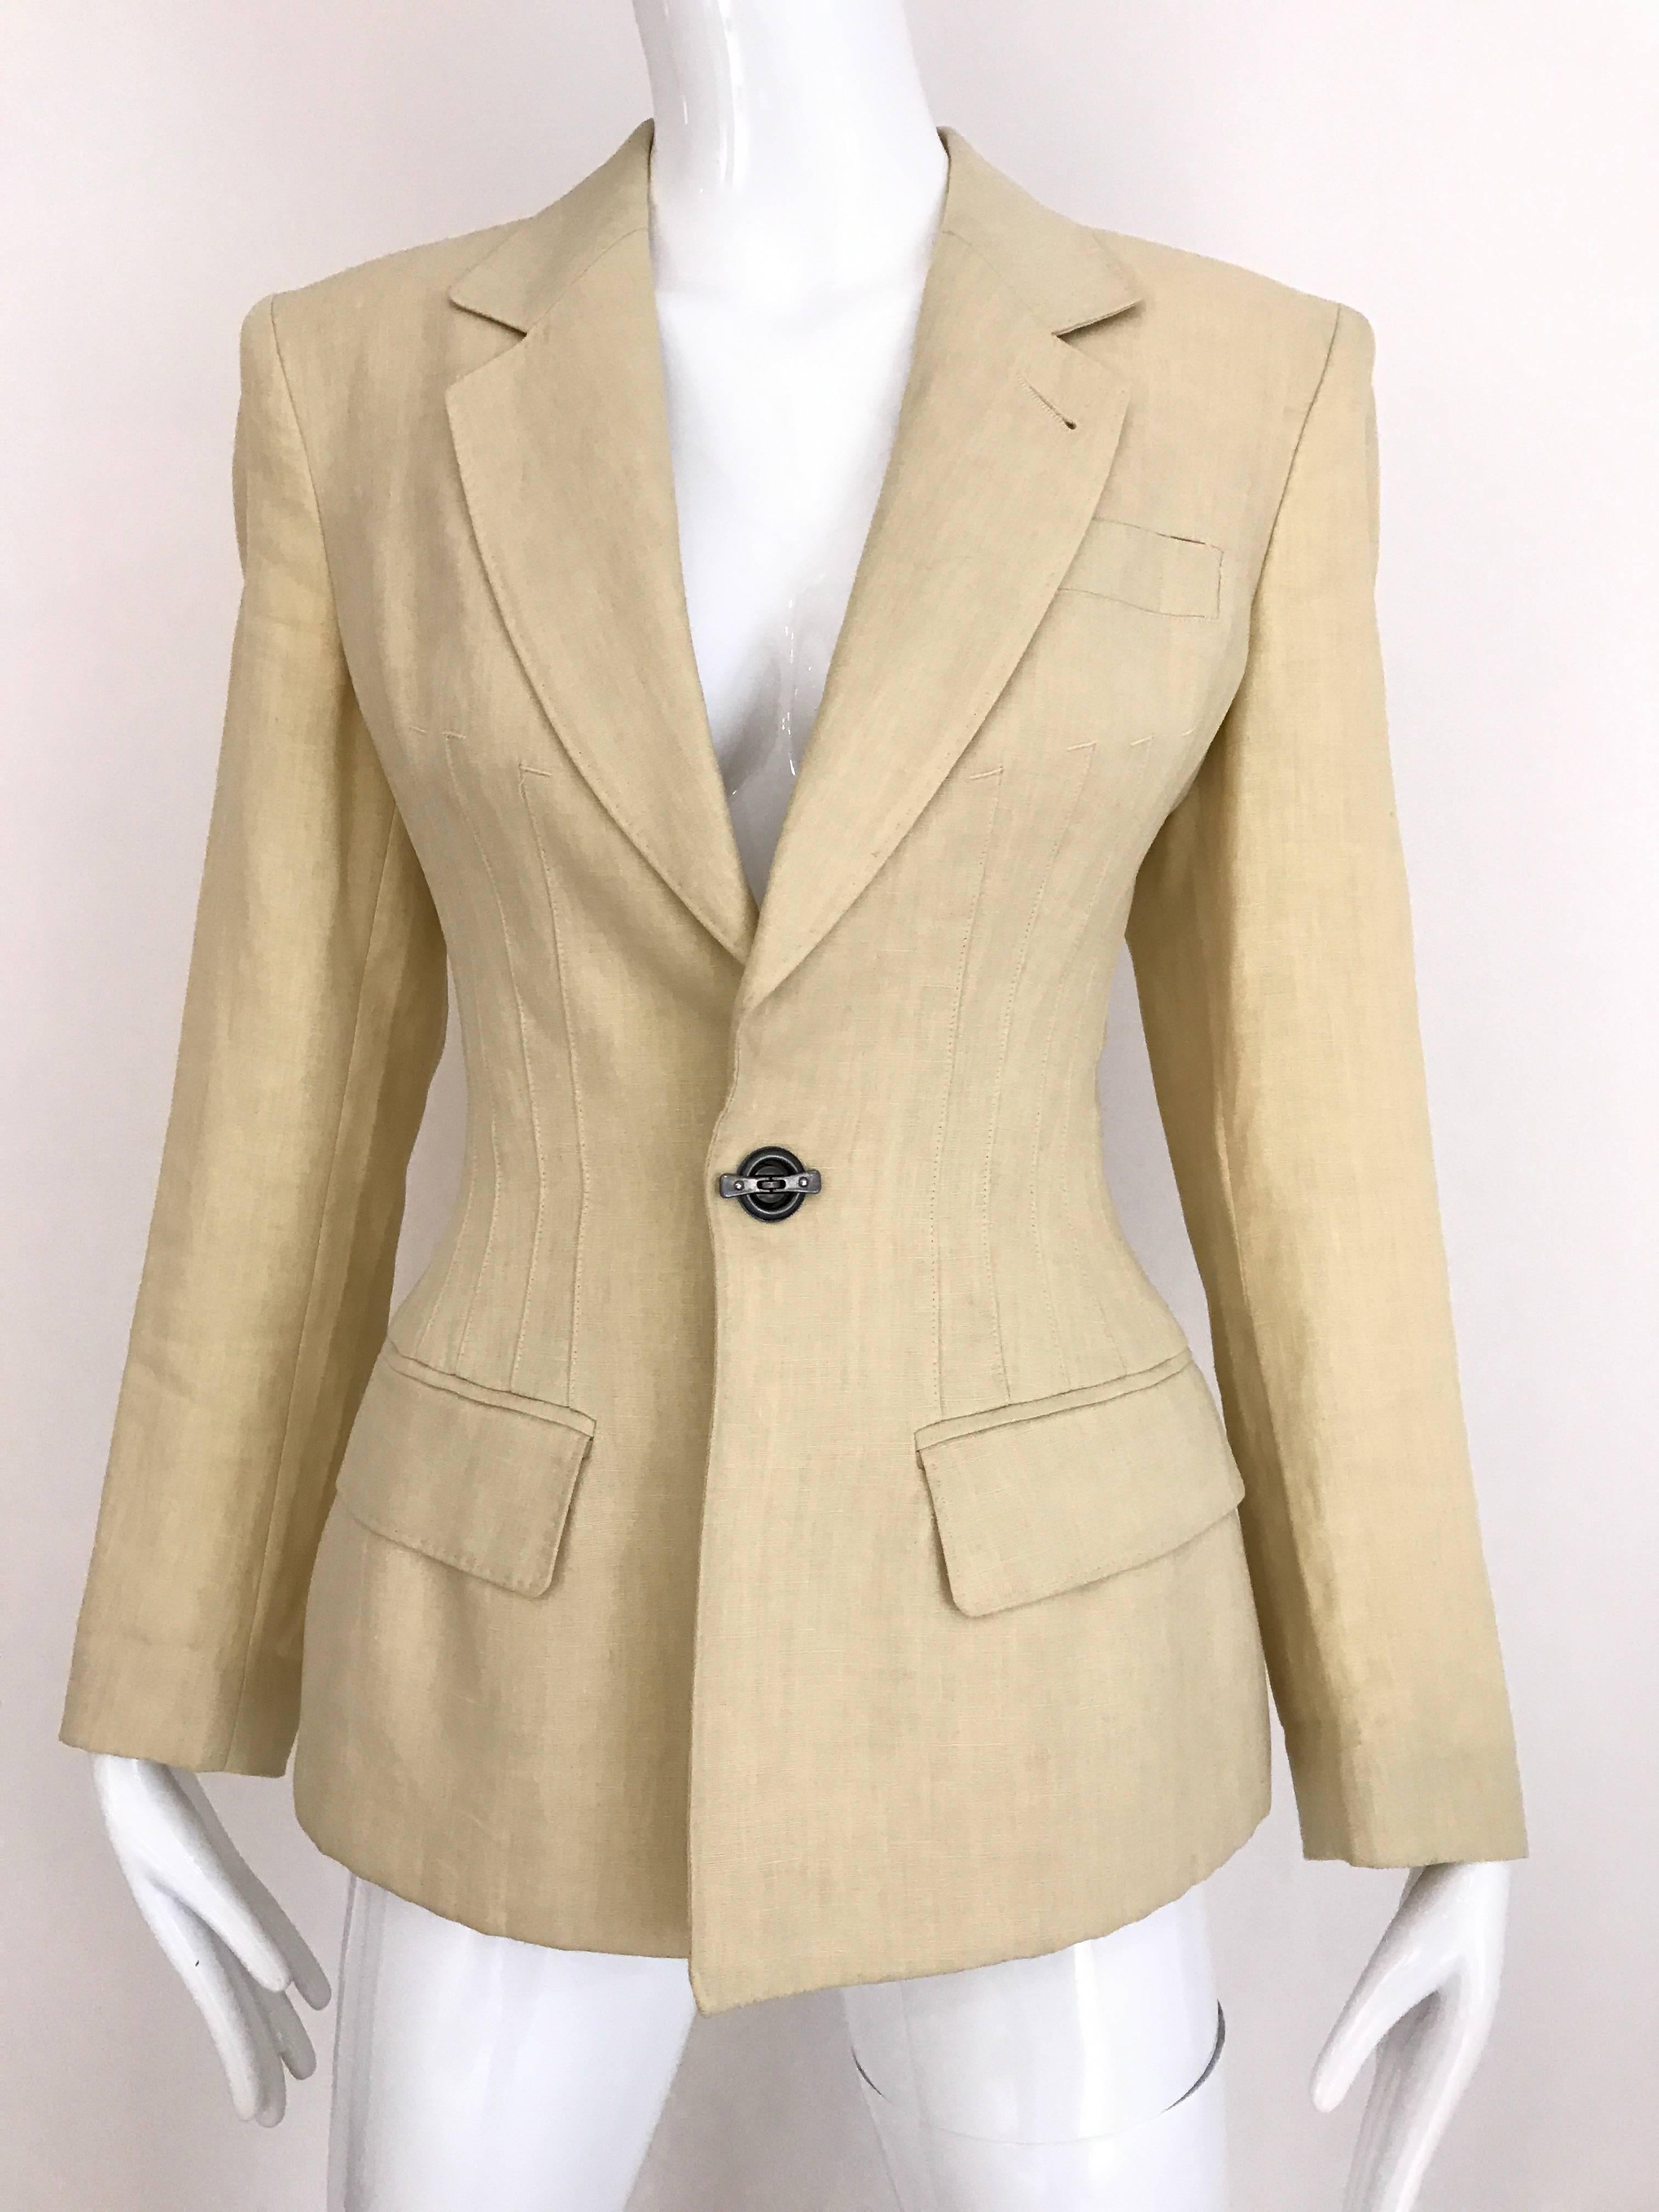 Vintage Gaultier Creme Linen Blazer Jacket lined in silk. Form fitting Jacket in a cut of 50s New Look Jacket. Jacket fastened with metal clasp,
Very flattering cut.  Nice summer jackets.

Bust: 36 inch / Waist: 27 inch / Hip: 34 inch / Blazer